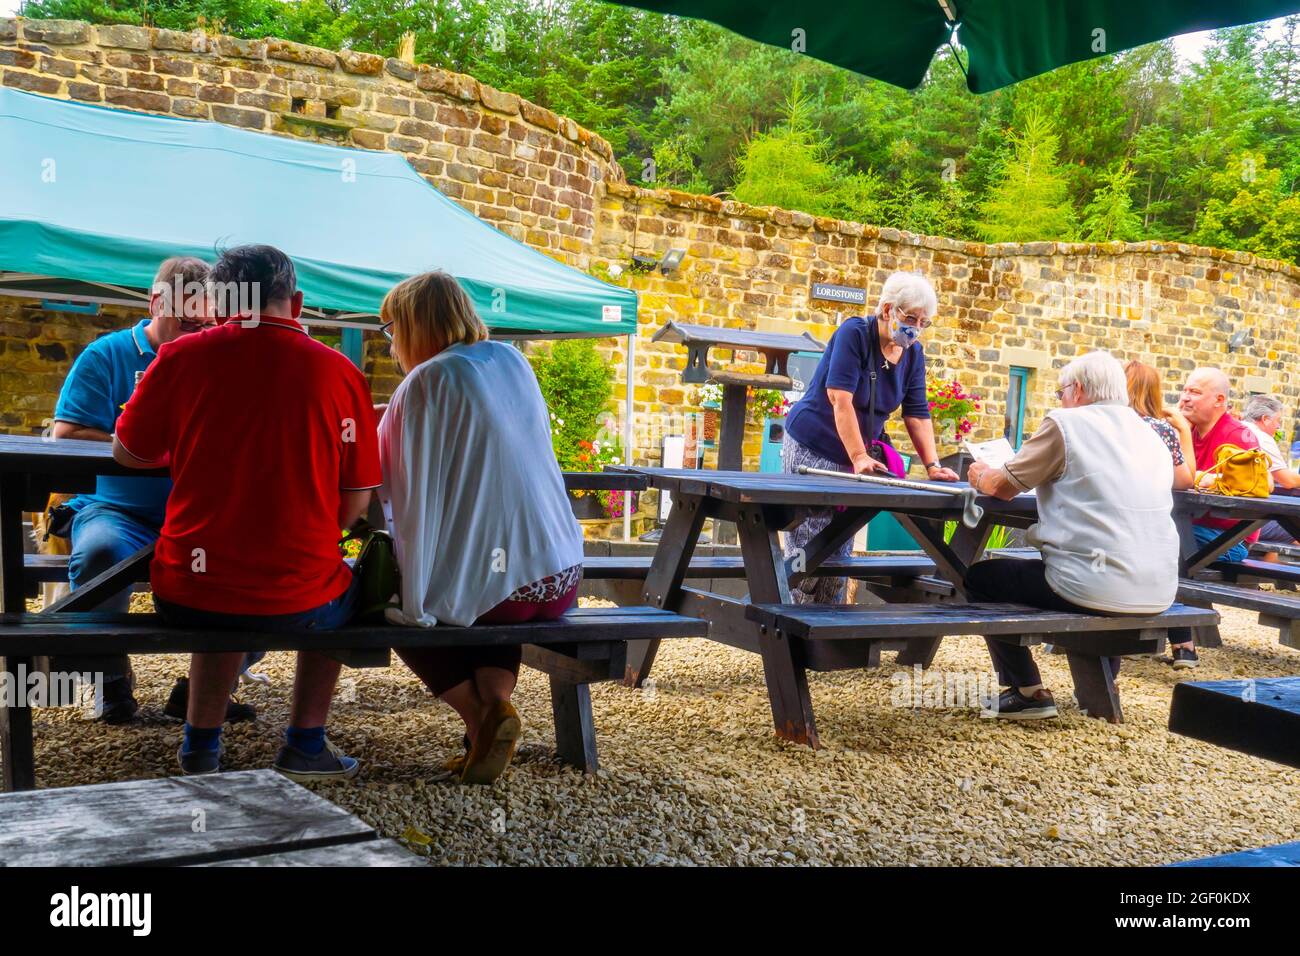 Customers at Lord Stones Café, prefering to eat outside under a large awning rather than going inside the café Stock Photo